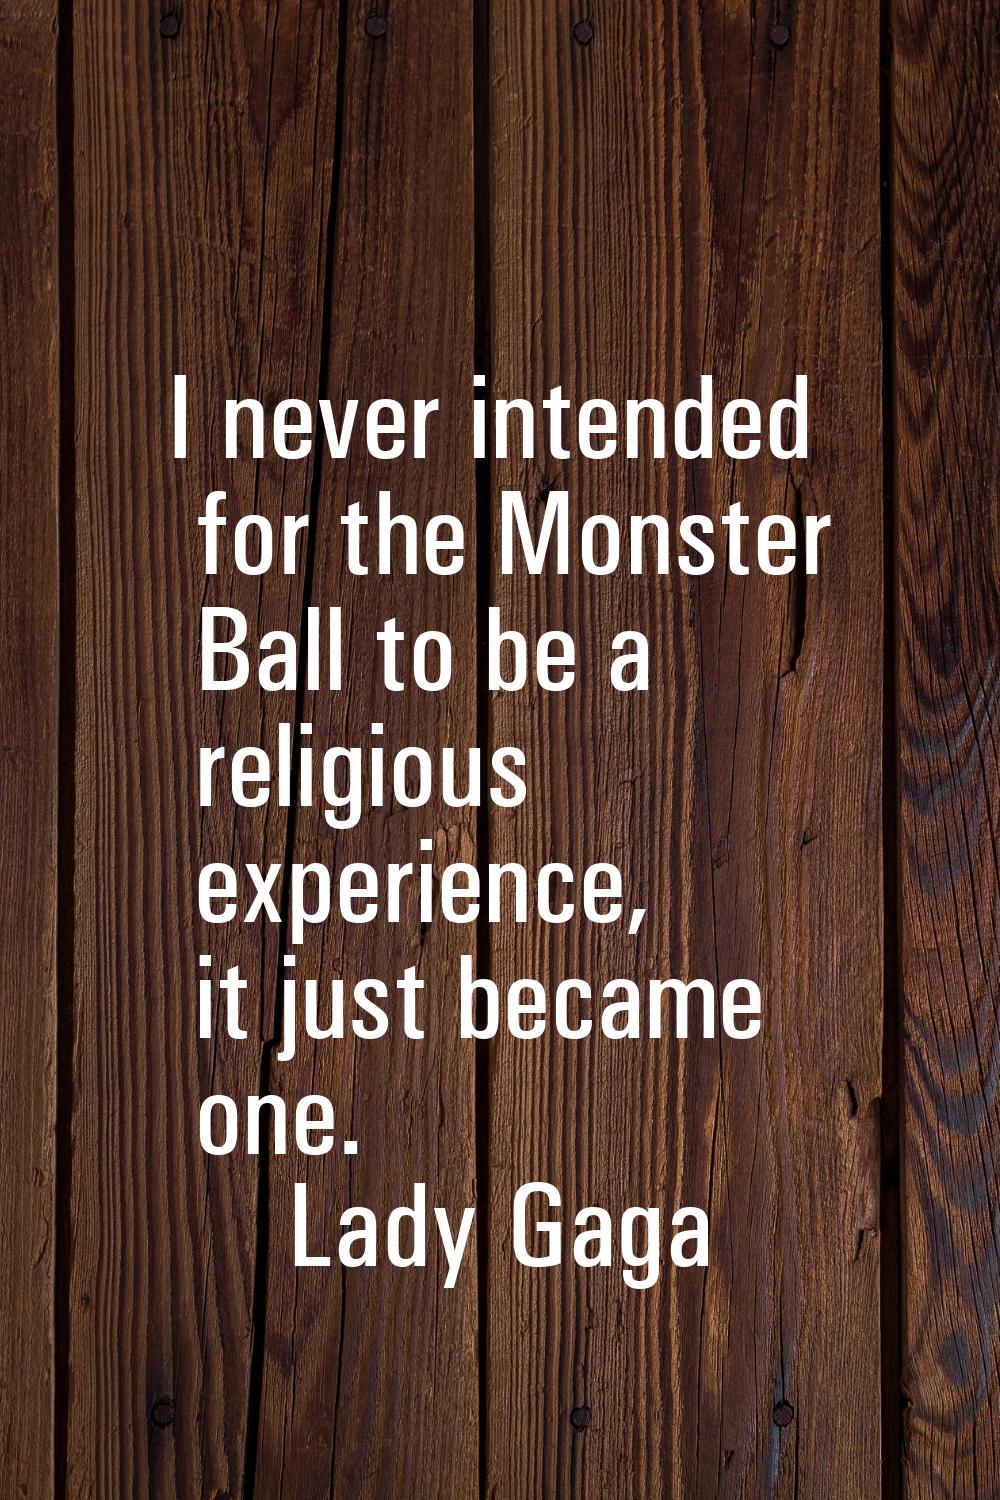 I never intended for the Monster Ball to be a religious experience, it just became one.